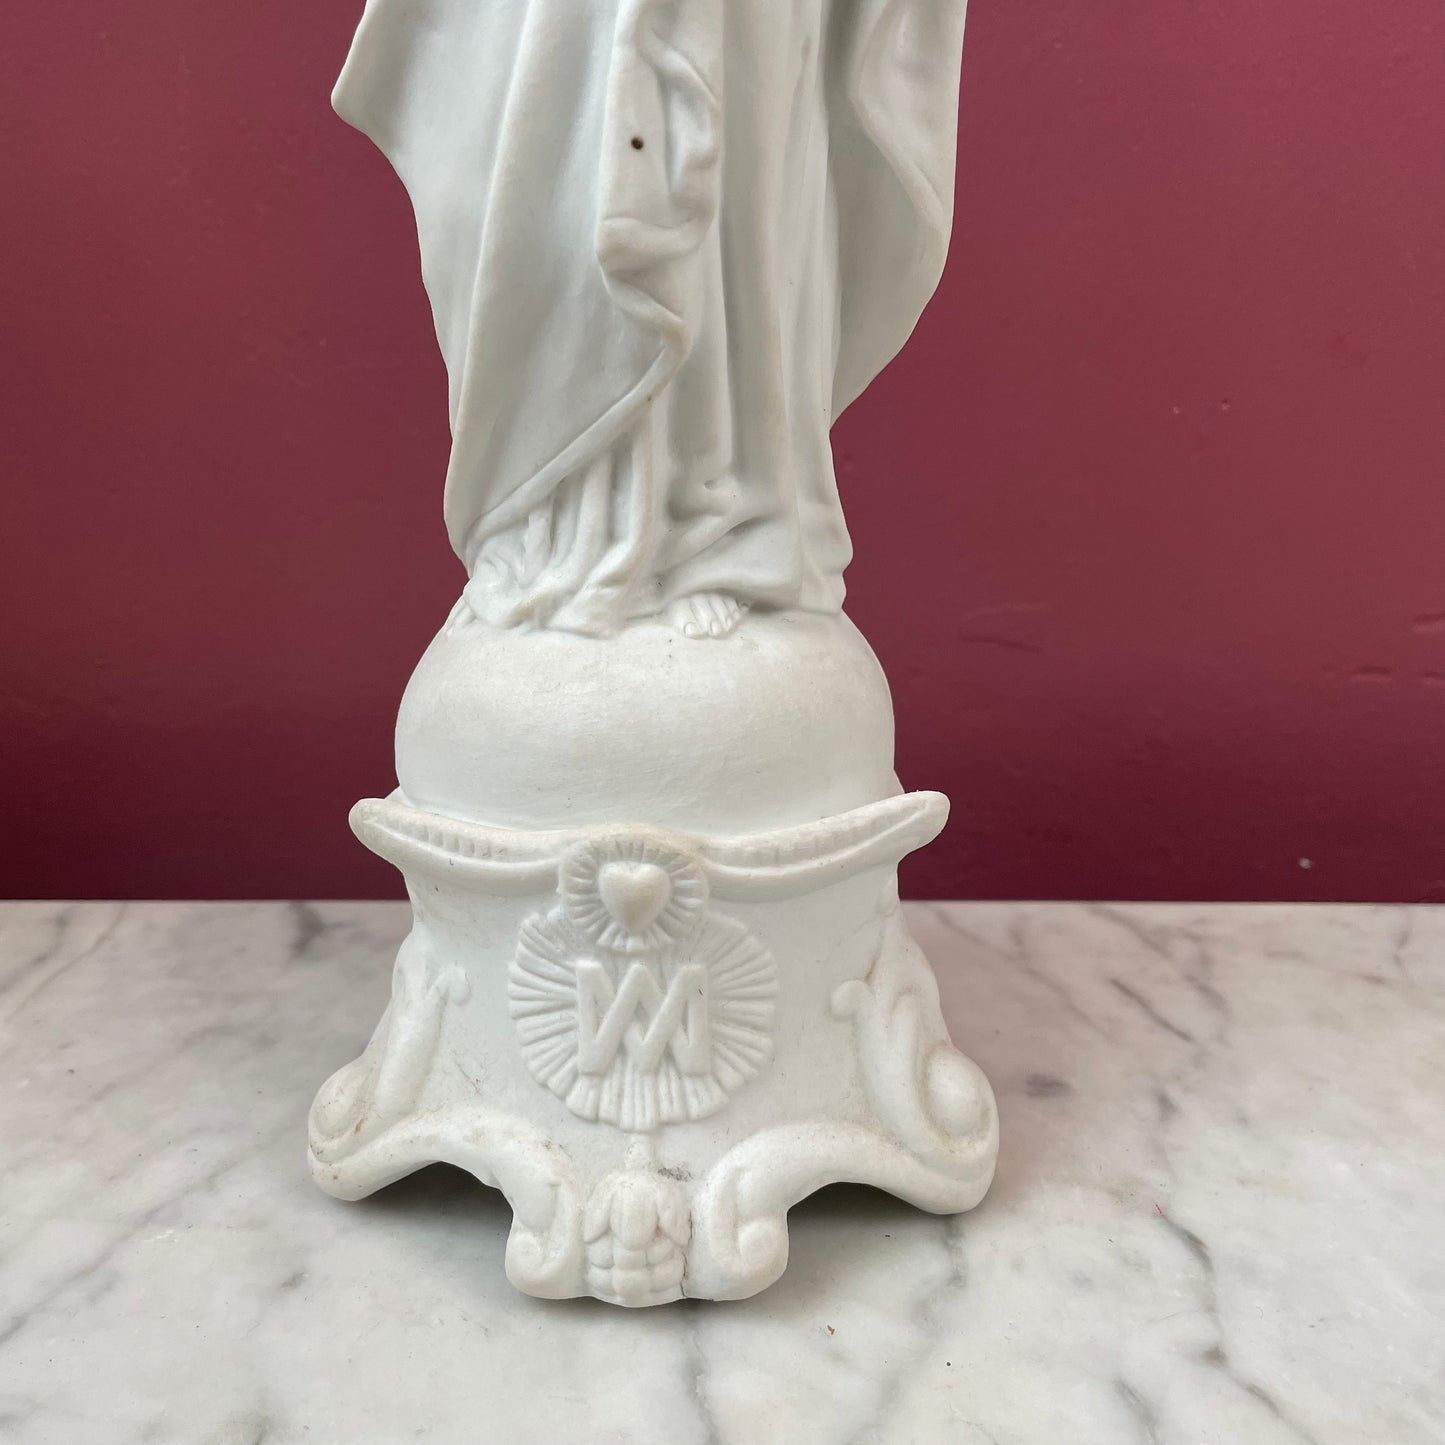 Antique Parian Statue of Mary